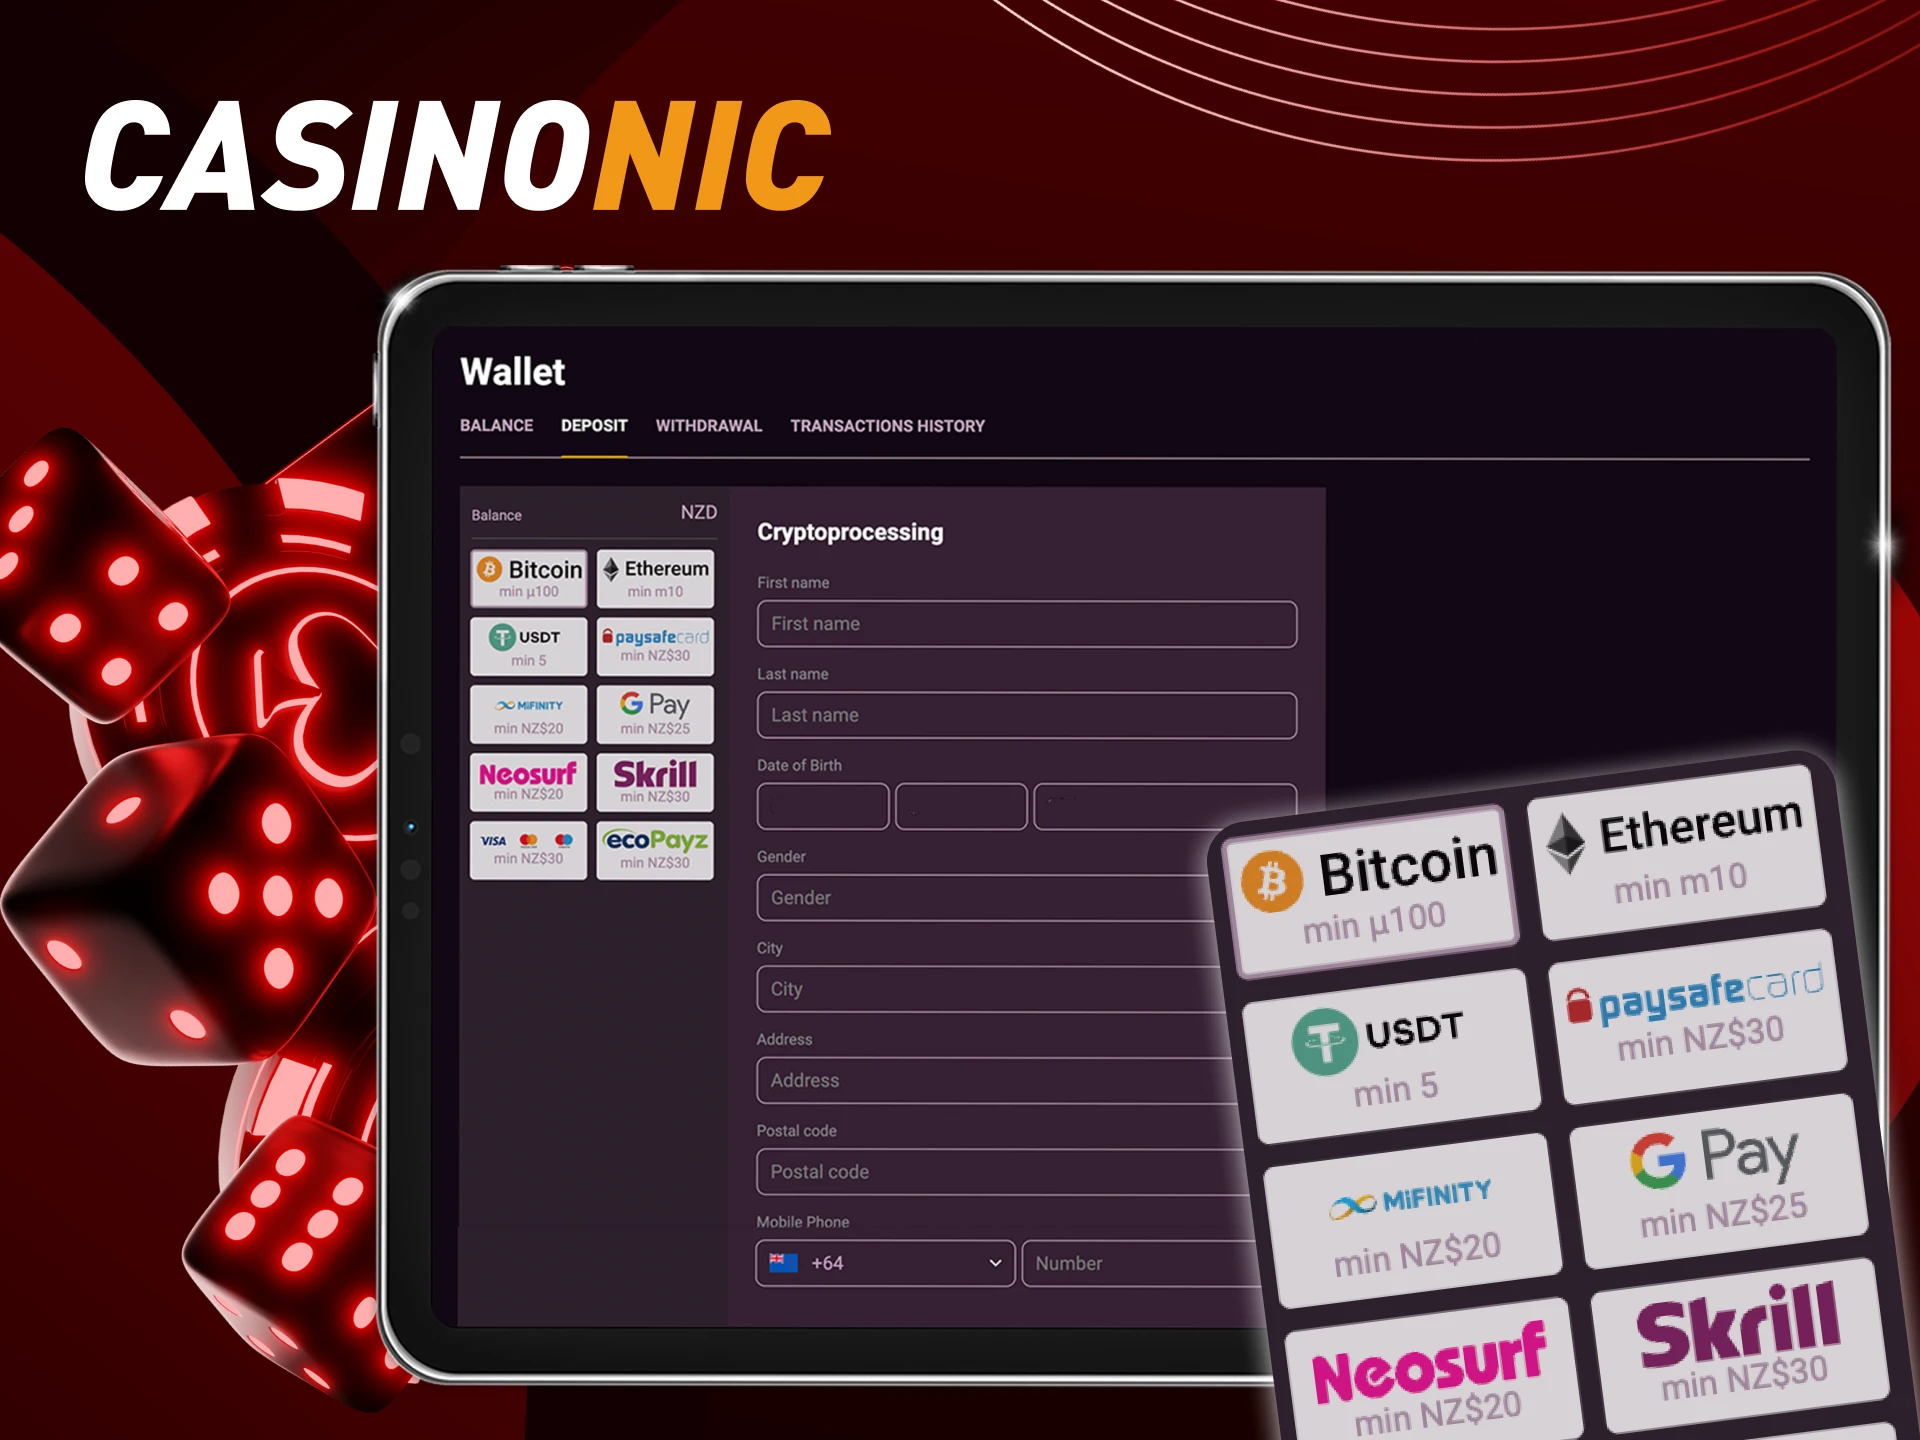 Instructions for players on how to make a deposit to their account in the online casino CasinoNic.